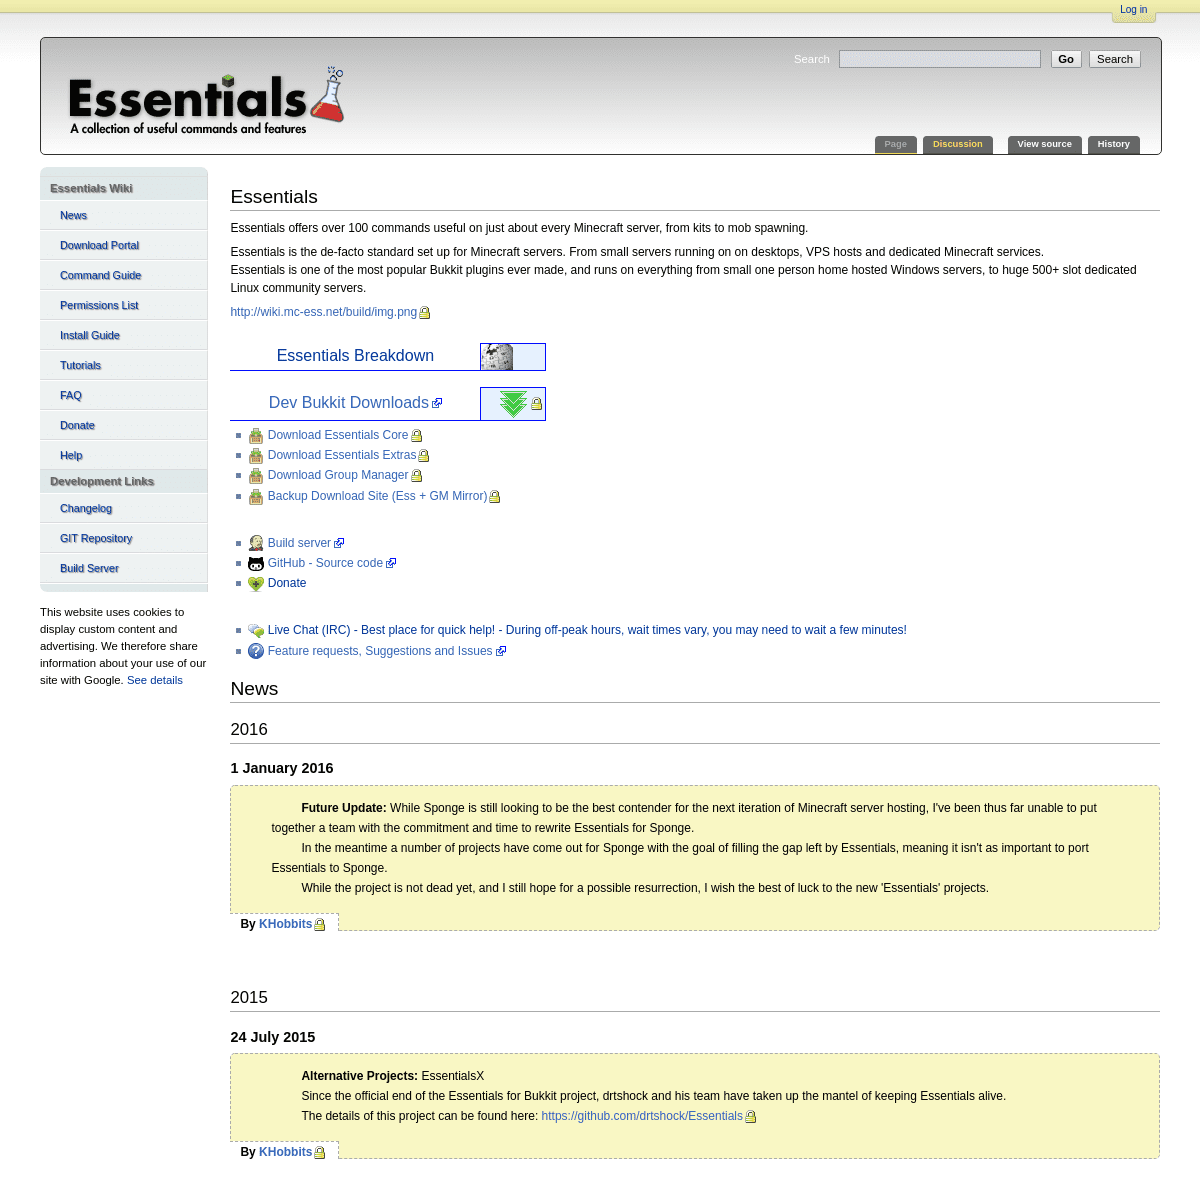 A complete backup of ess3.net